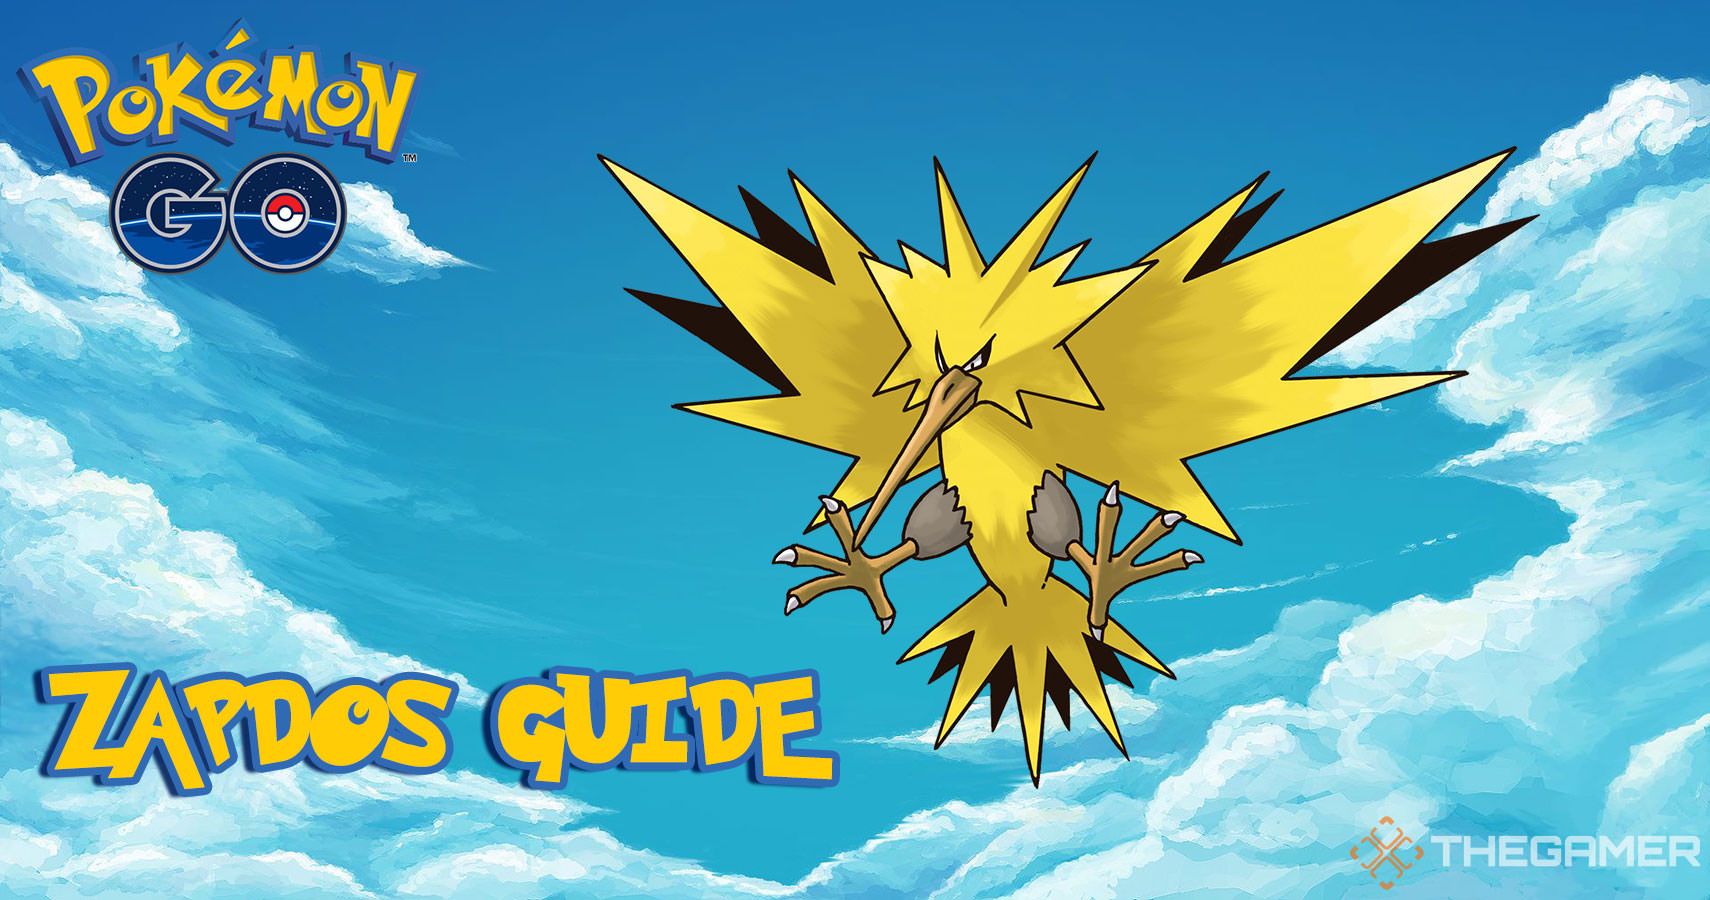 Best Pokémon Go movesets for Mewtwo, Zapdos, Moltres, Articuno